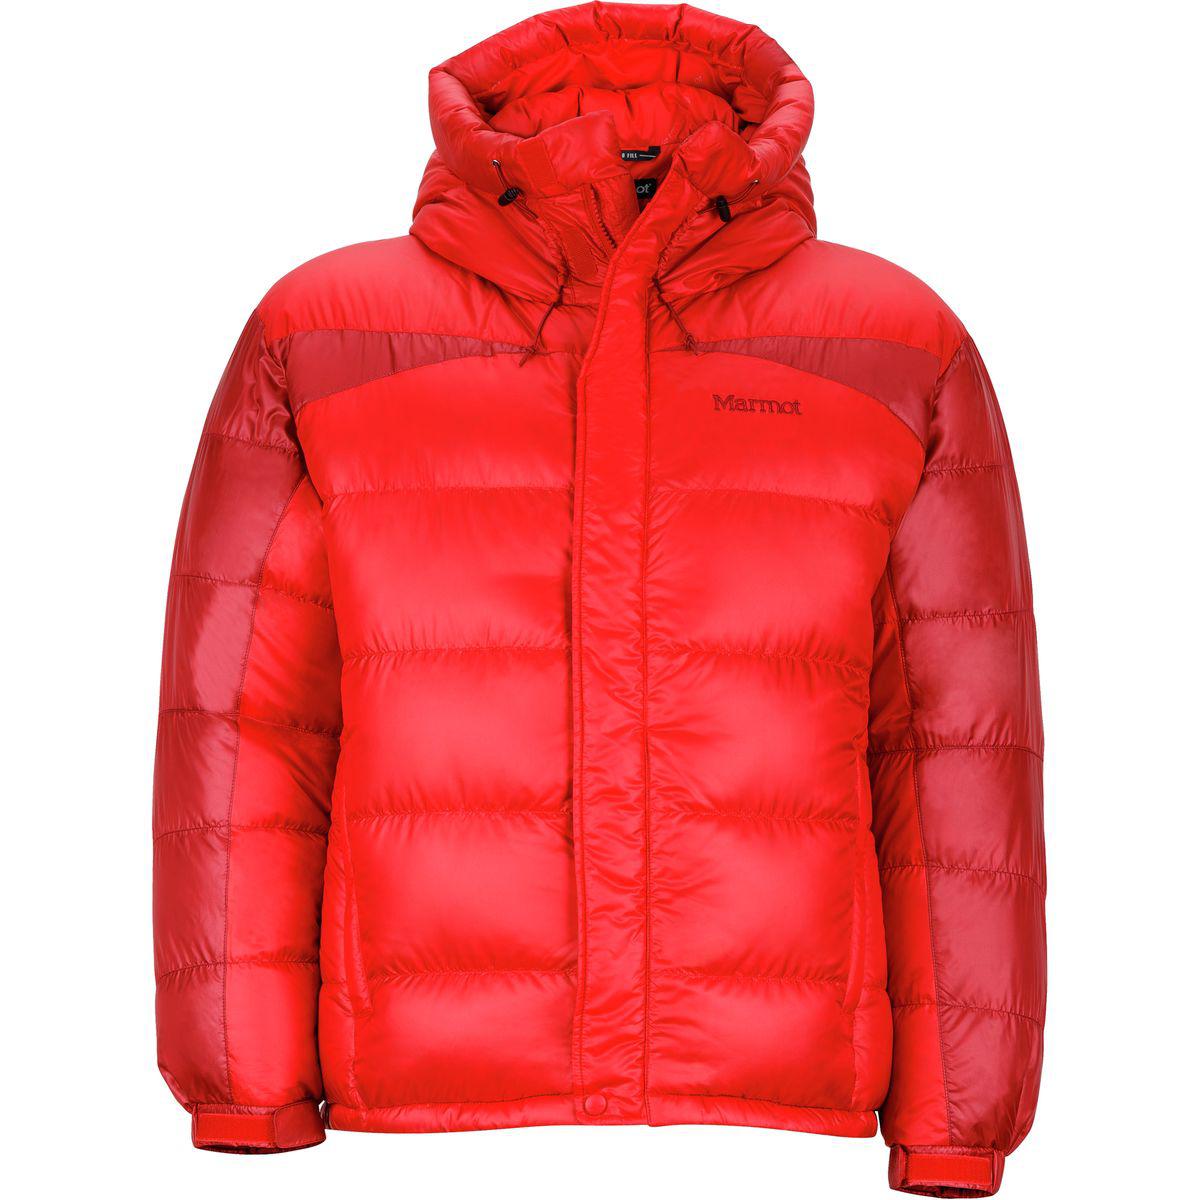 Marmot Goose Greenland Baffled Down Jacket in Red for Men - Lyst